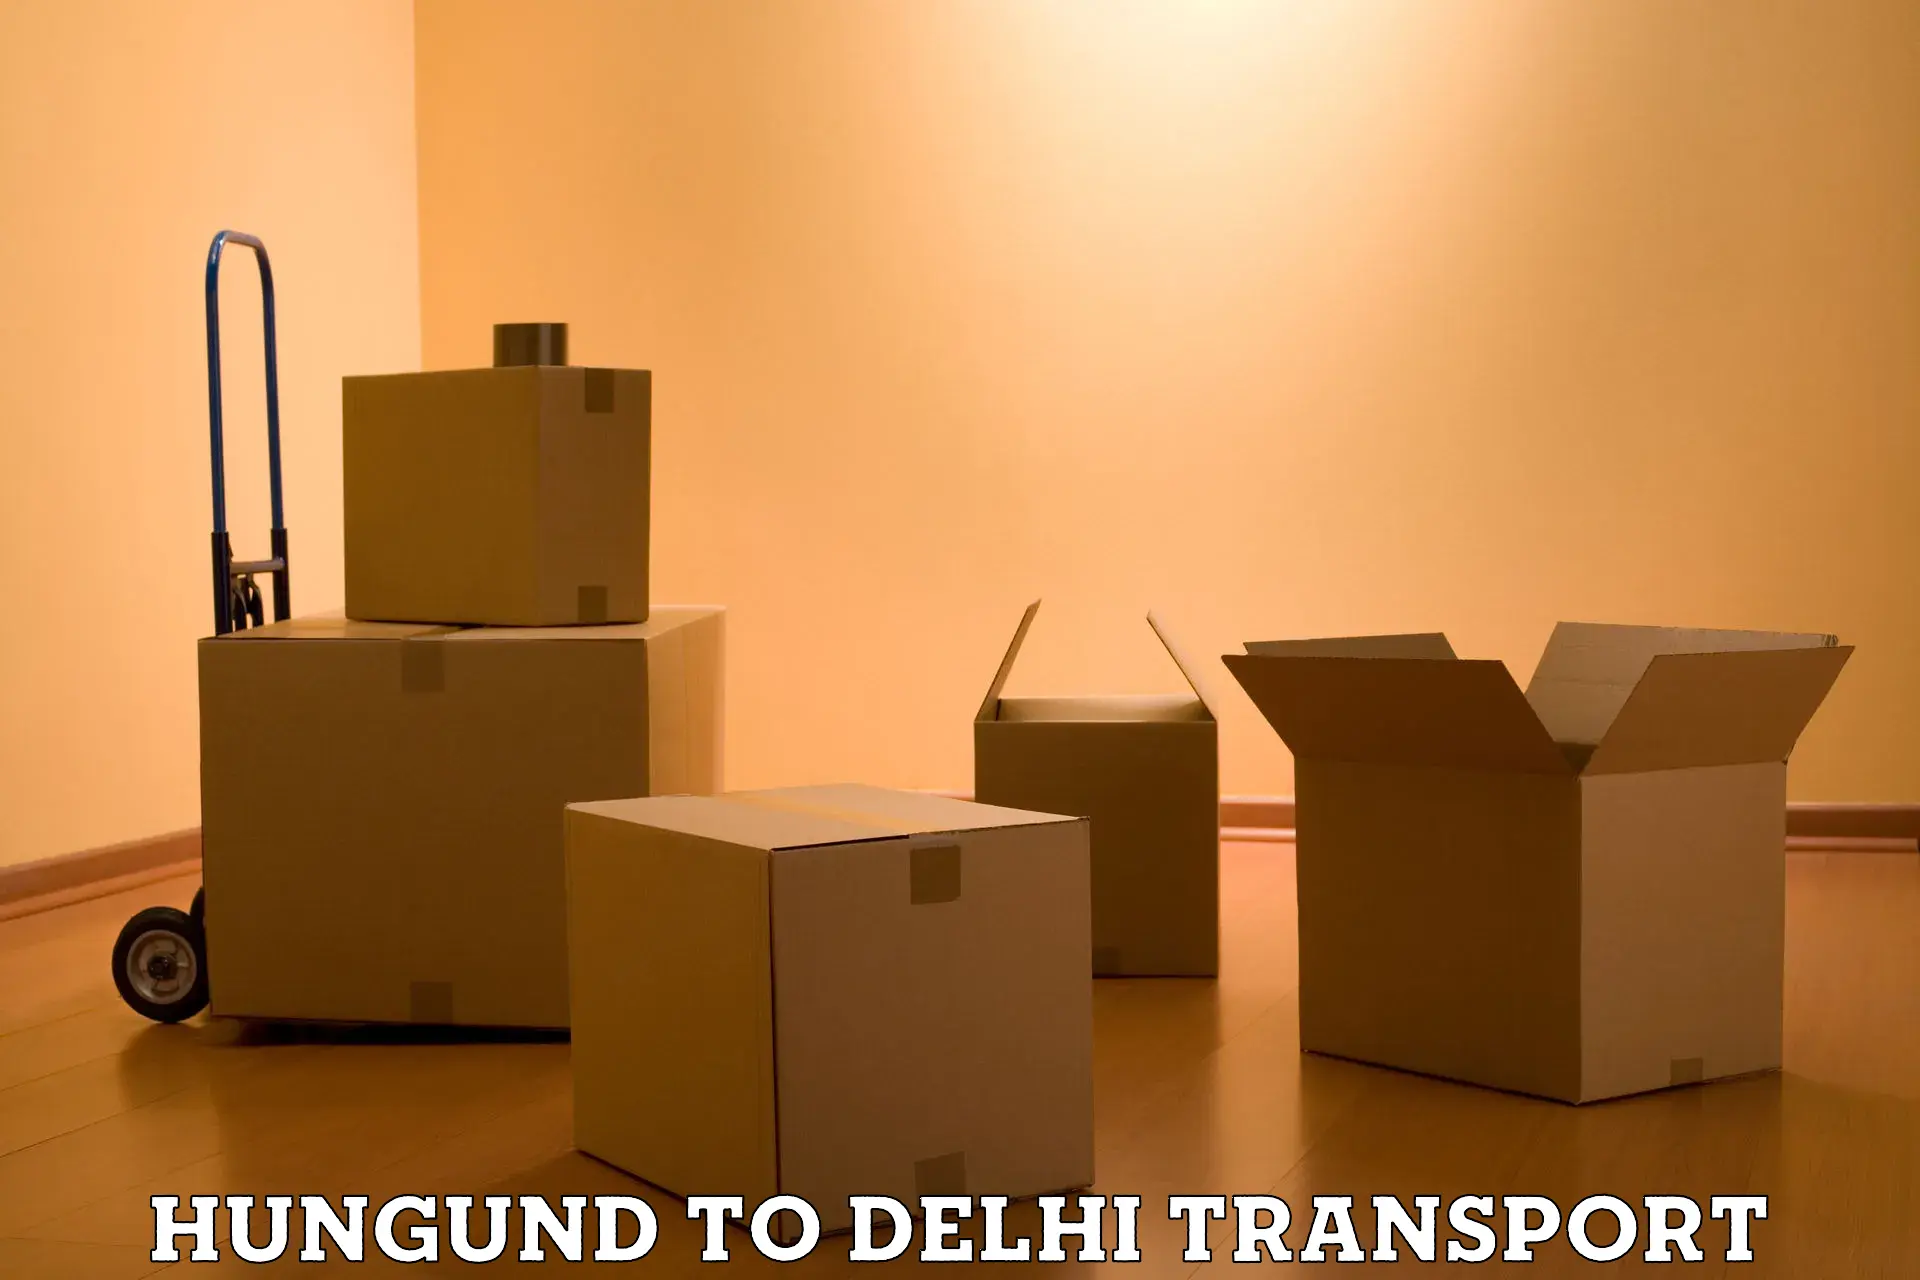 Interstate transport services Hungund to Lodhi Road